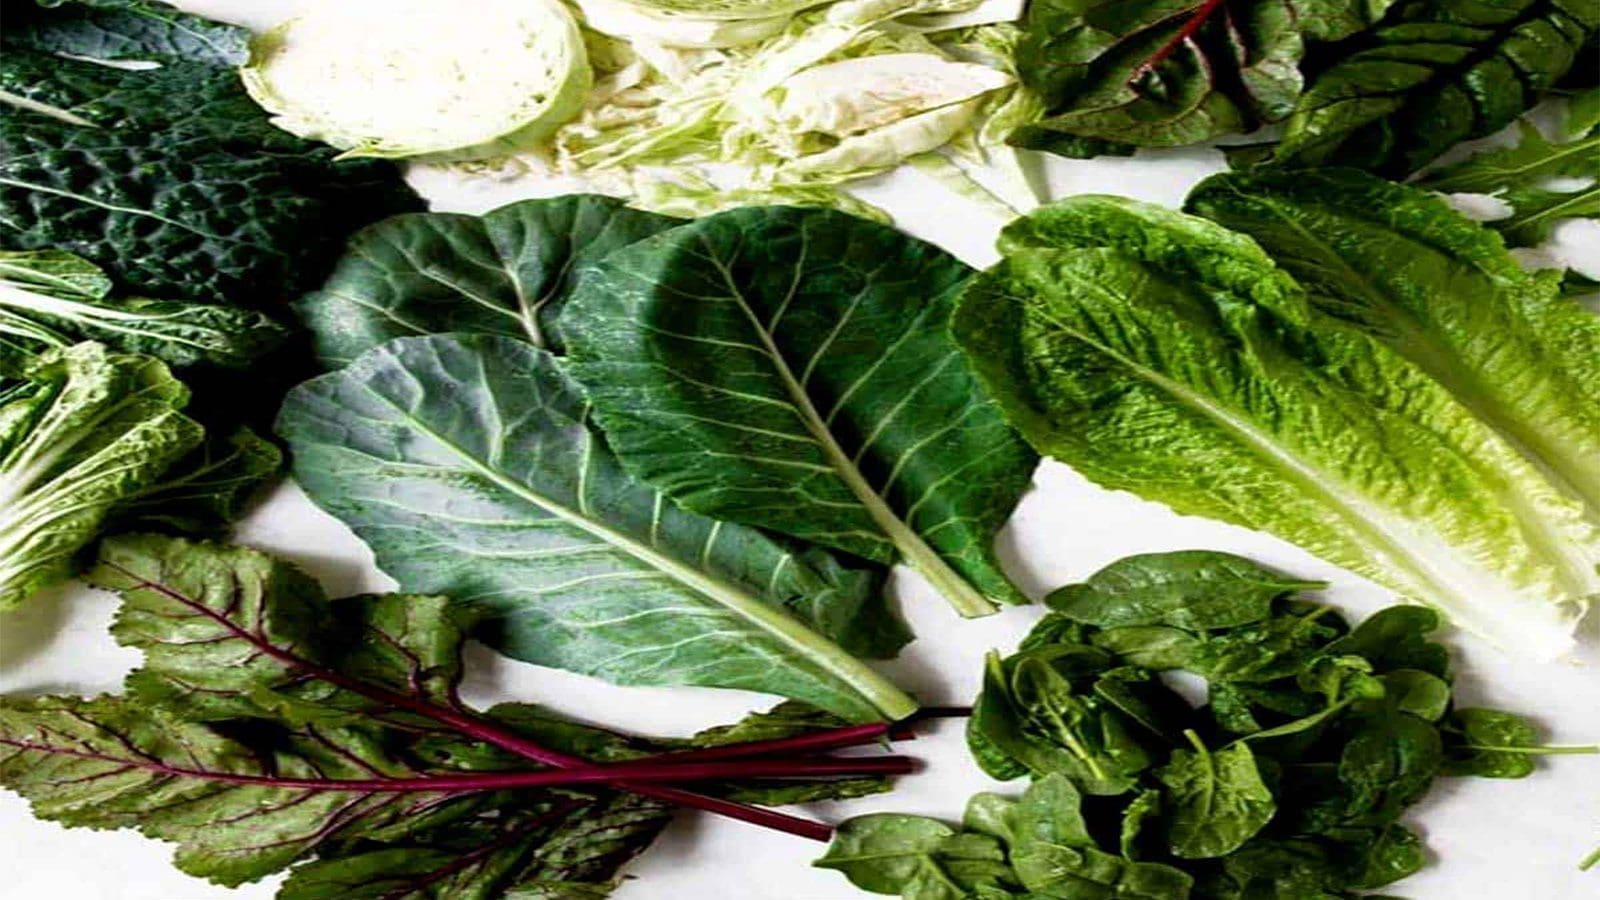 FDA continues to improve safety of leafy greens in U.S